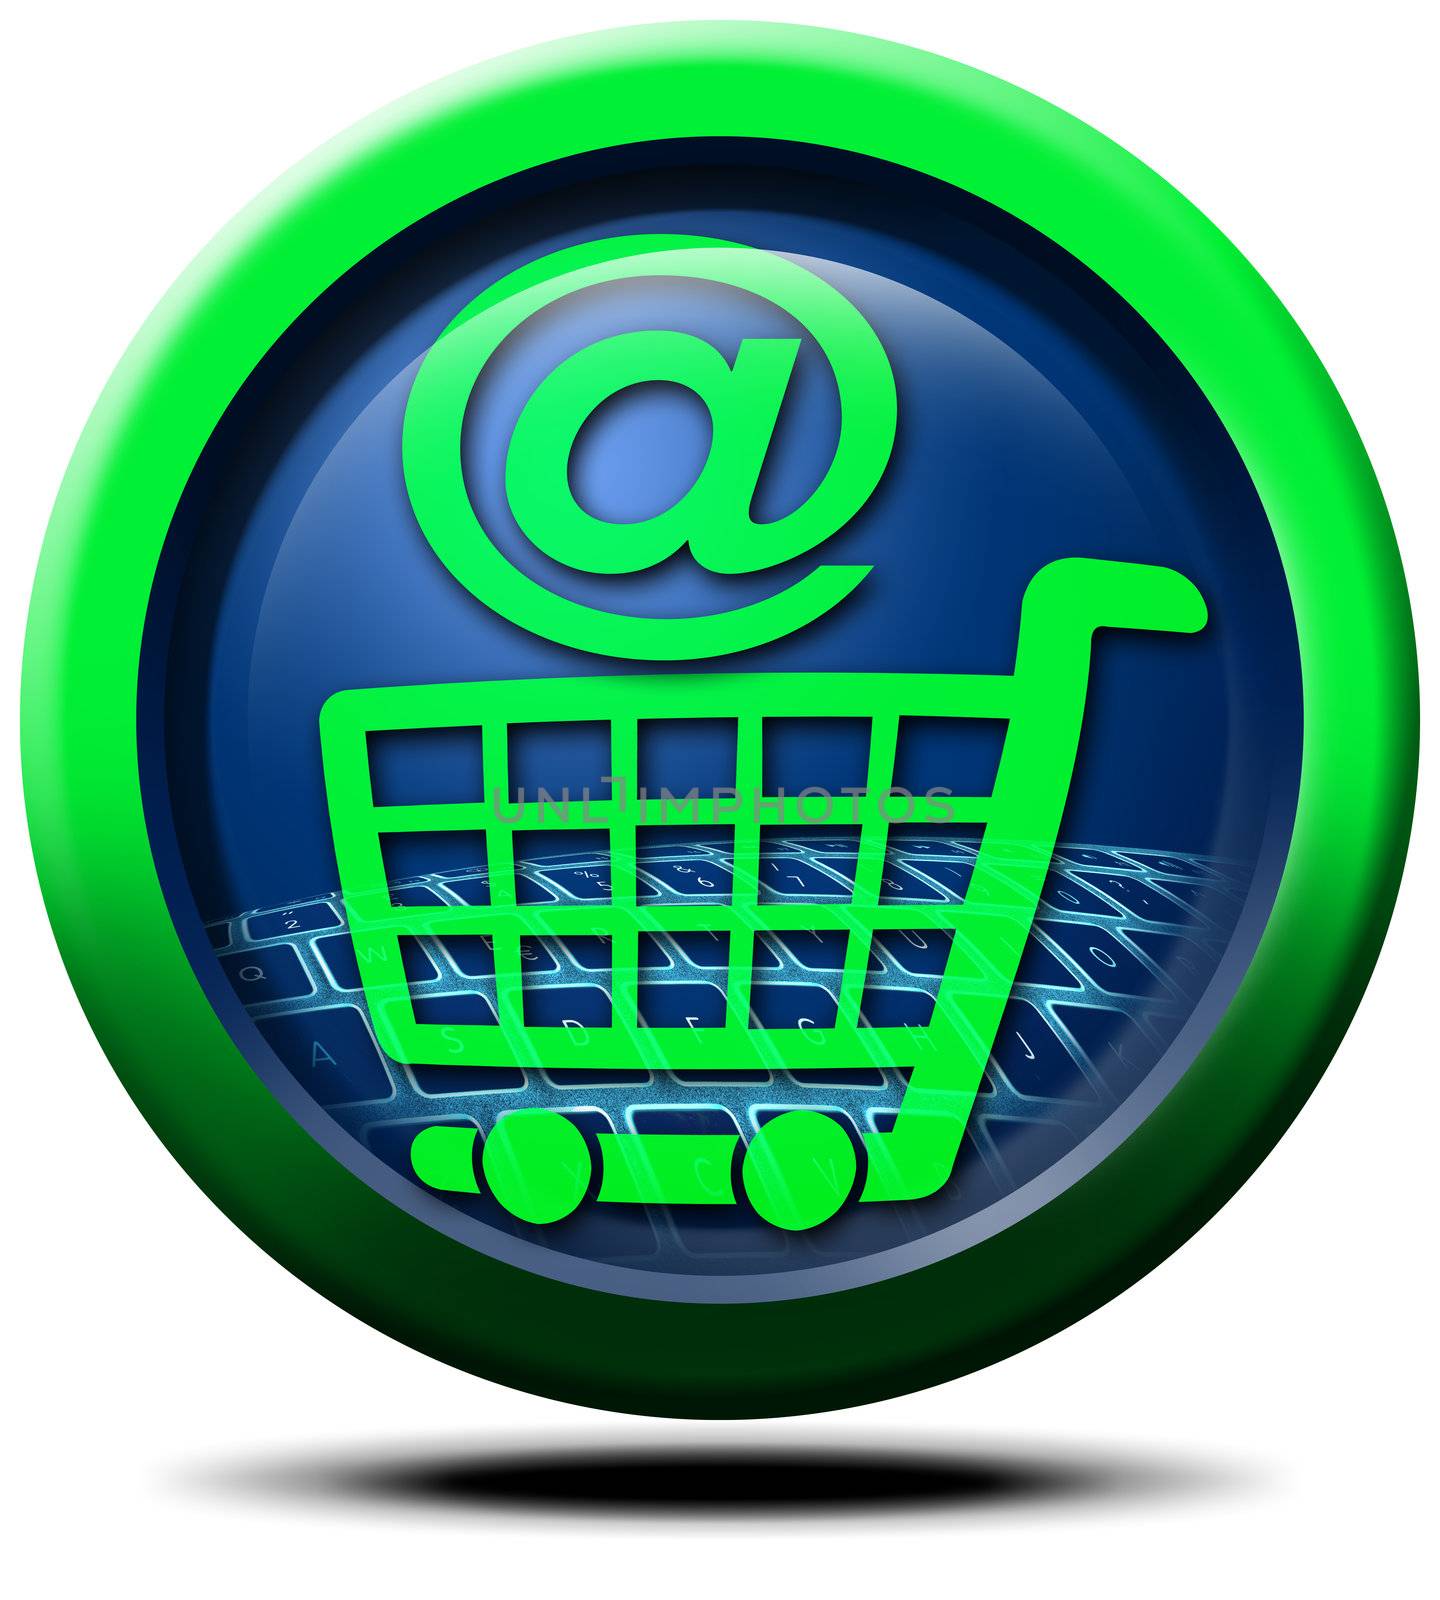 Pulsating icon with symbol internet and cart of the expense